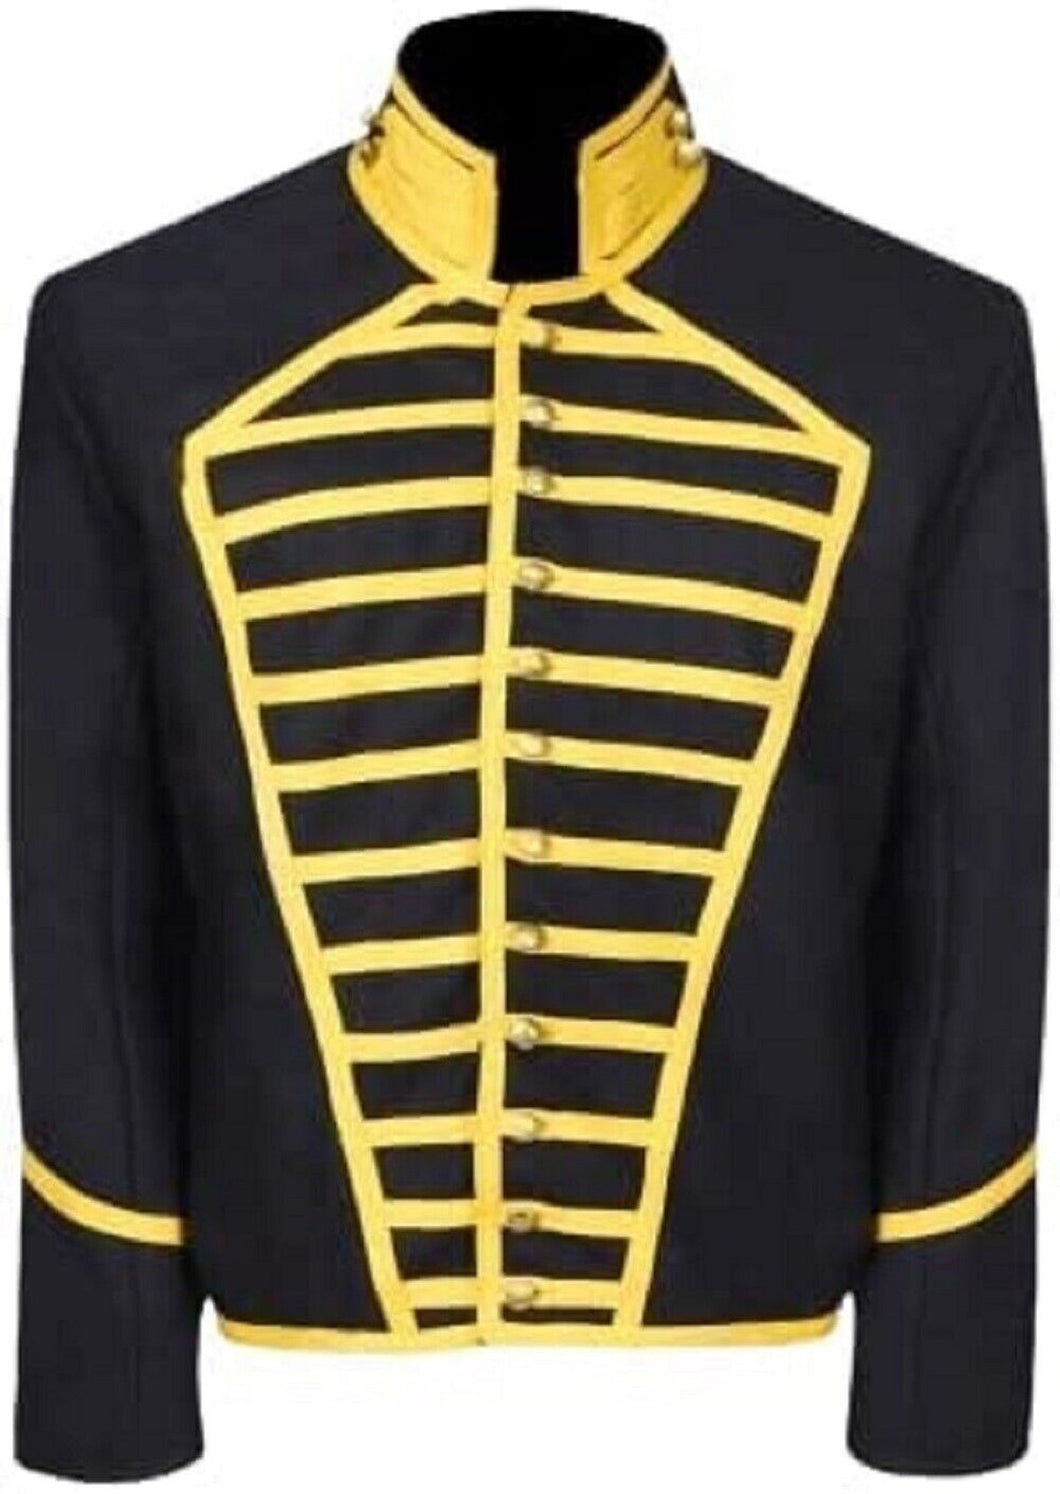 Civil War Union Regulation Enlisted Cavalry Musician Wool Shell Jacket   Civil War union Soldiers wool sack coat Navy blue US military War jackets Wool jacket Cavalry Shell Jacket Shell Jacket military Jacket Confederate jackets Confederate coat